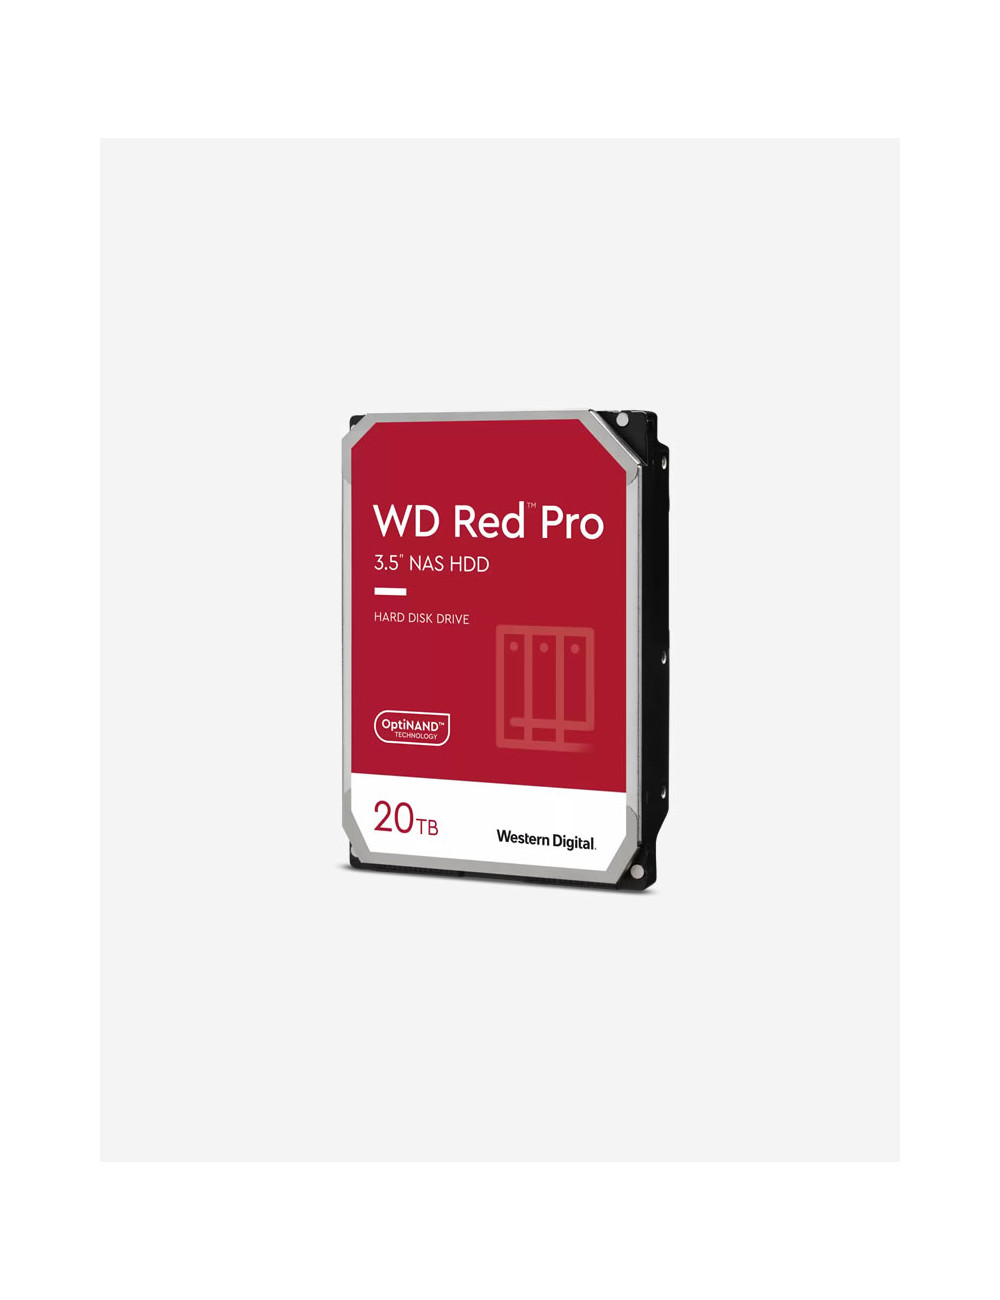 WD RED PRO 20TB 3.5" HDD Drive